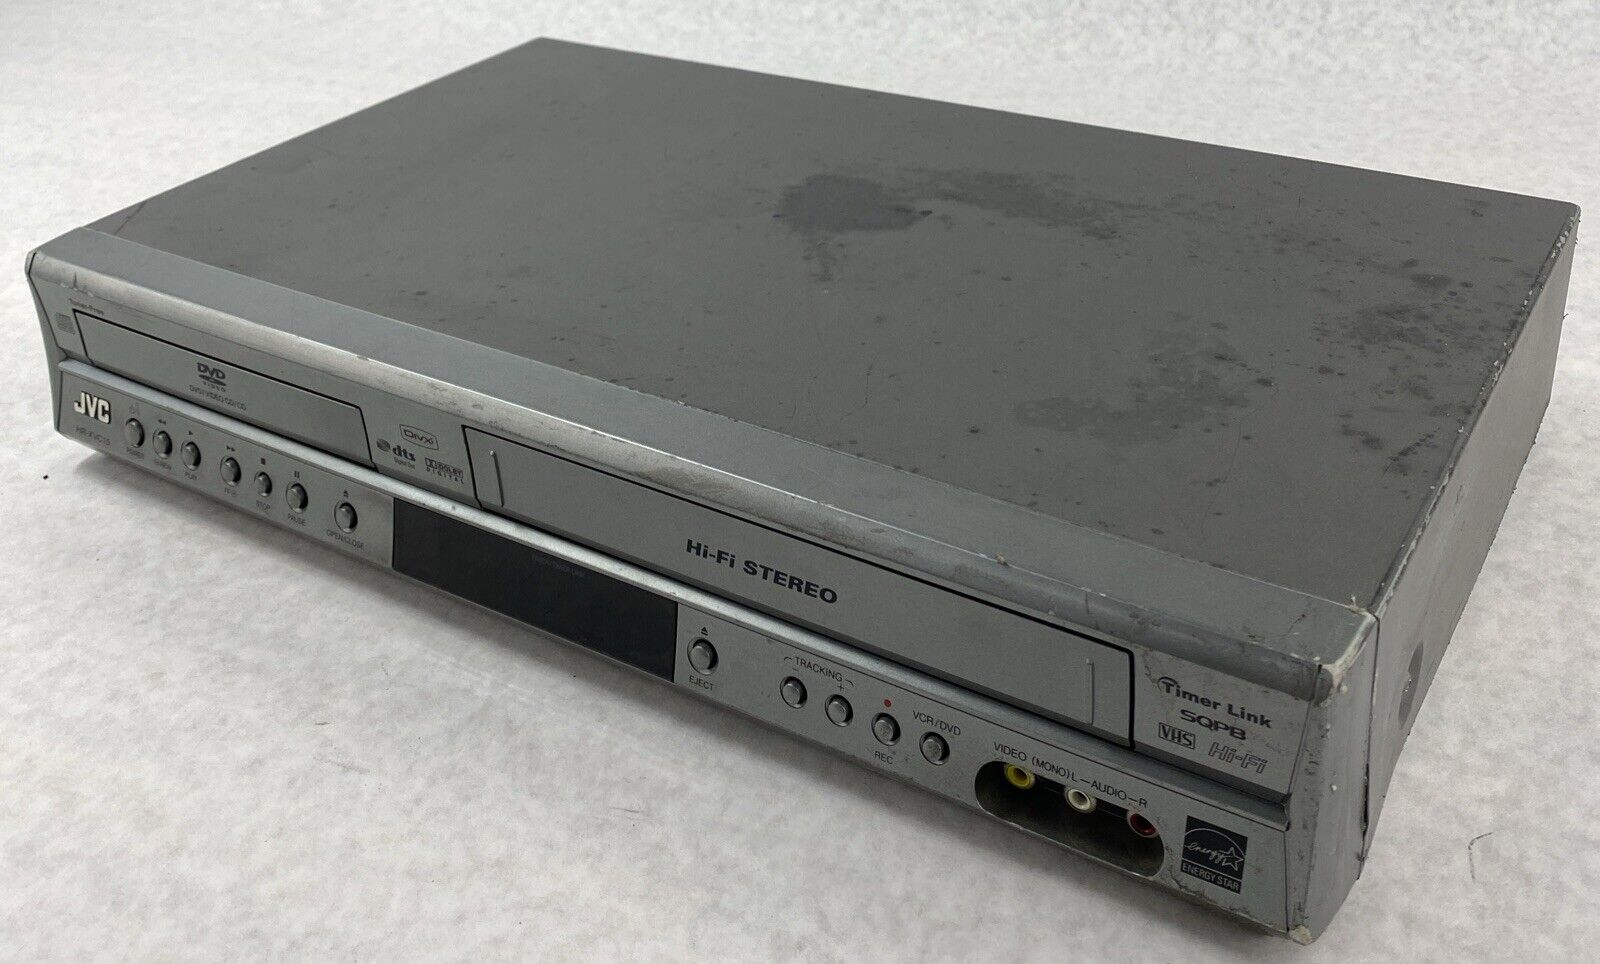 JVC HR-XVC15SU VCR DVD VHS Cassette Combo Player TESTED but NO REMOTE